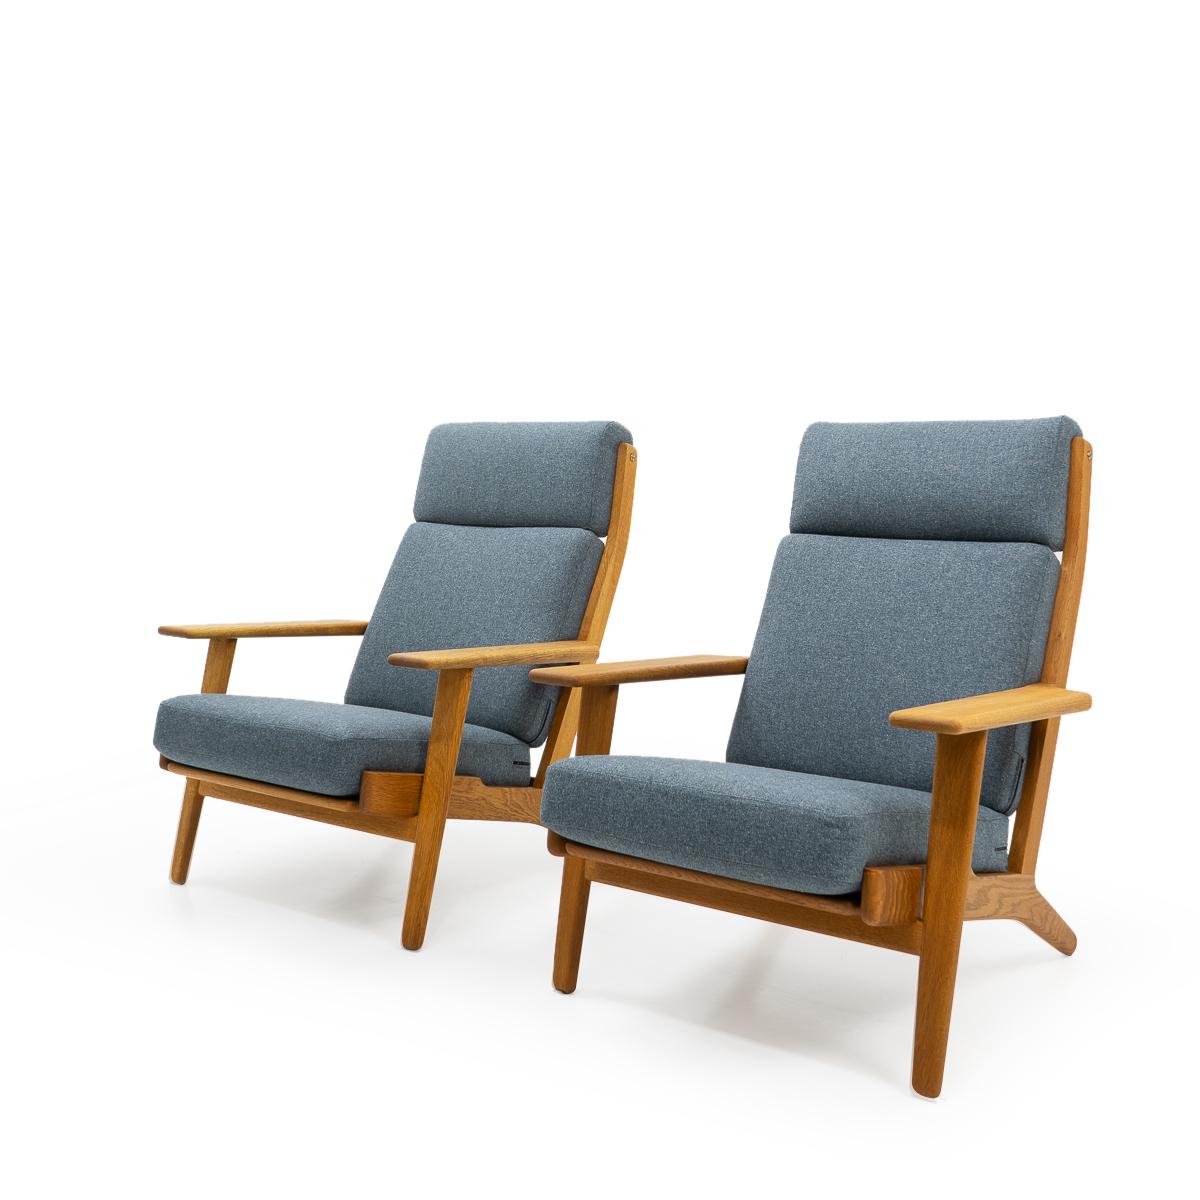 One of the most recognized designs by Hans Wegner and probably the whole danish mid-century modern period is the GE 290 sofa and arm chair produced by Getama. The 290 series is most recognized by it strong and long “iron board style” armrests and